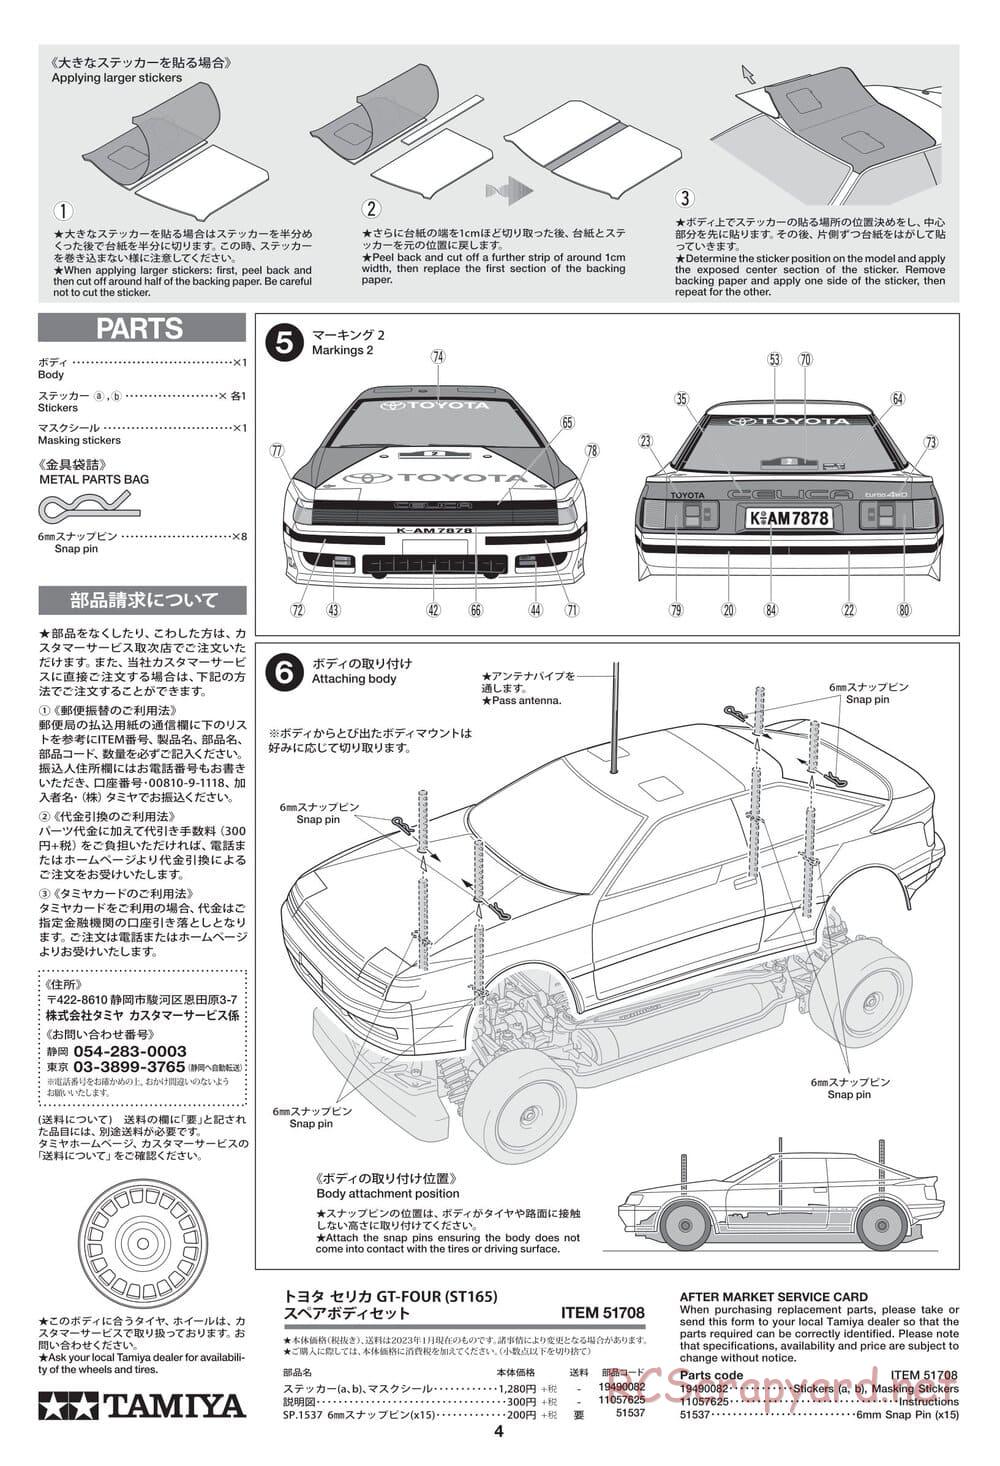 Tamiya - Toyota Celica GT-Four (ST165) - TT-02 Chassis - Body Manual - Page 4